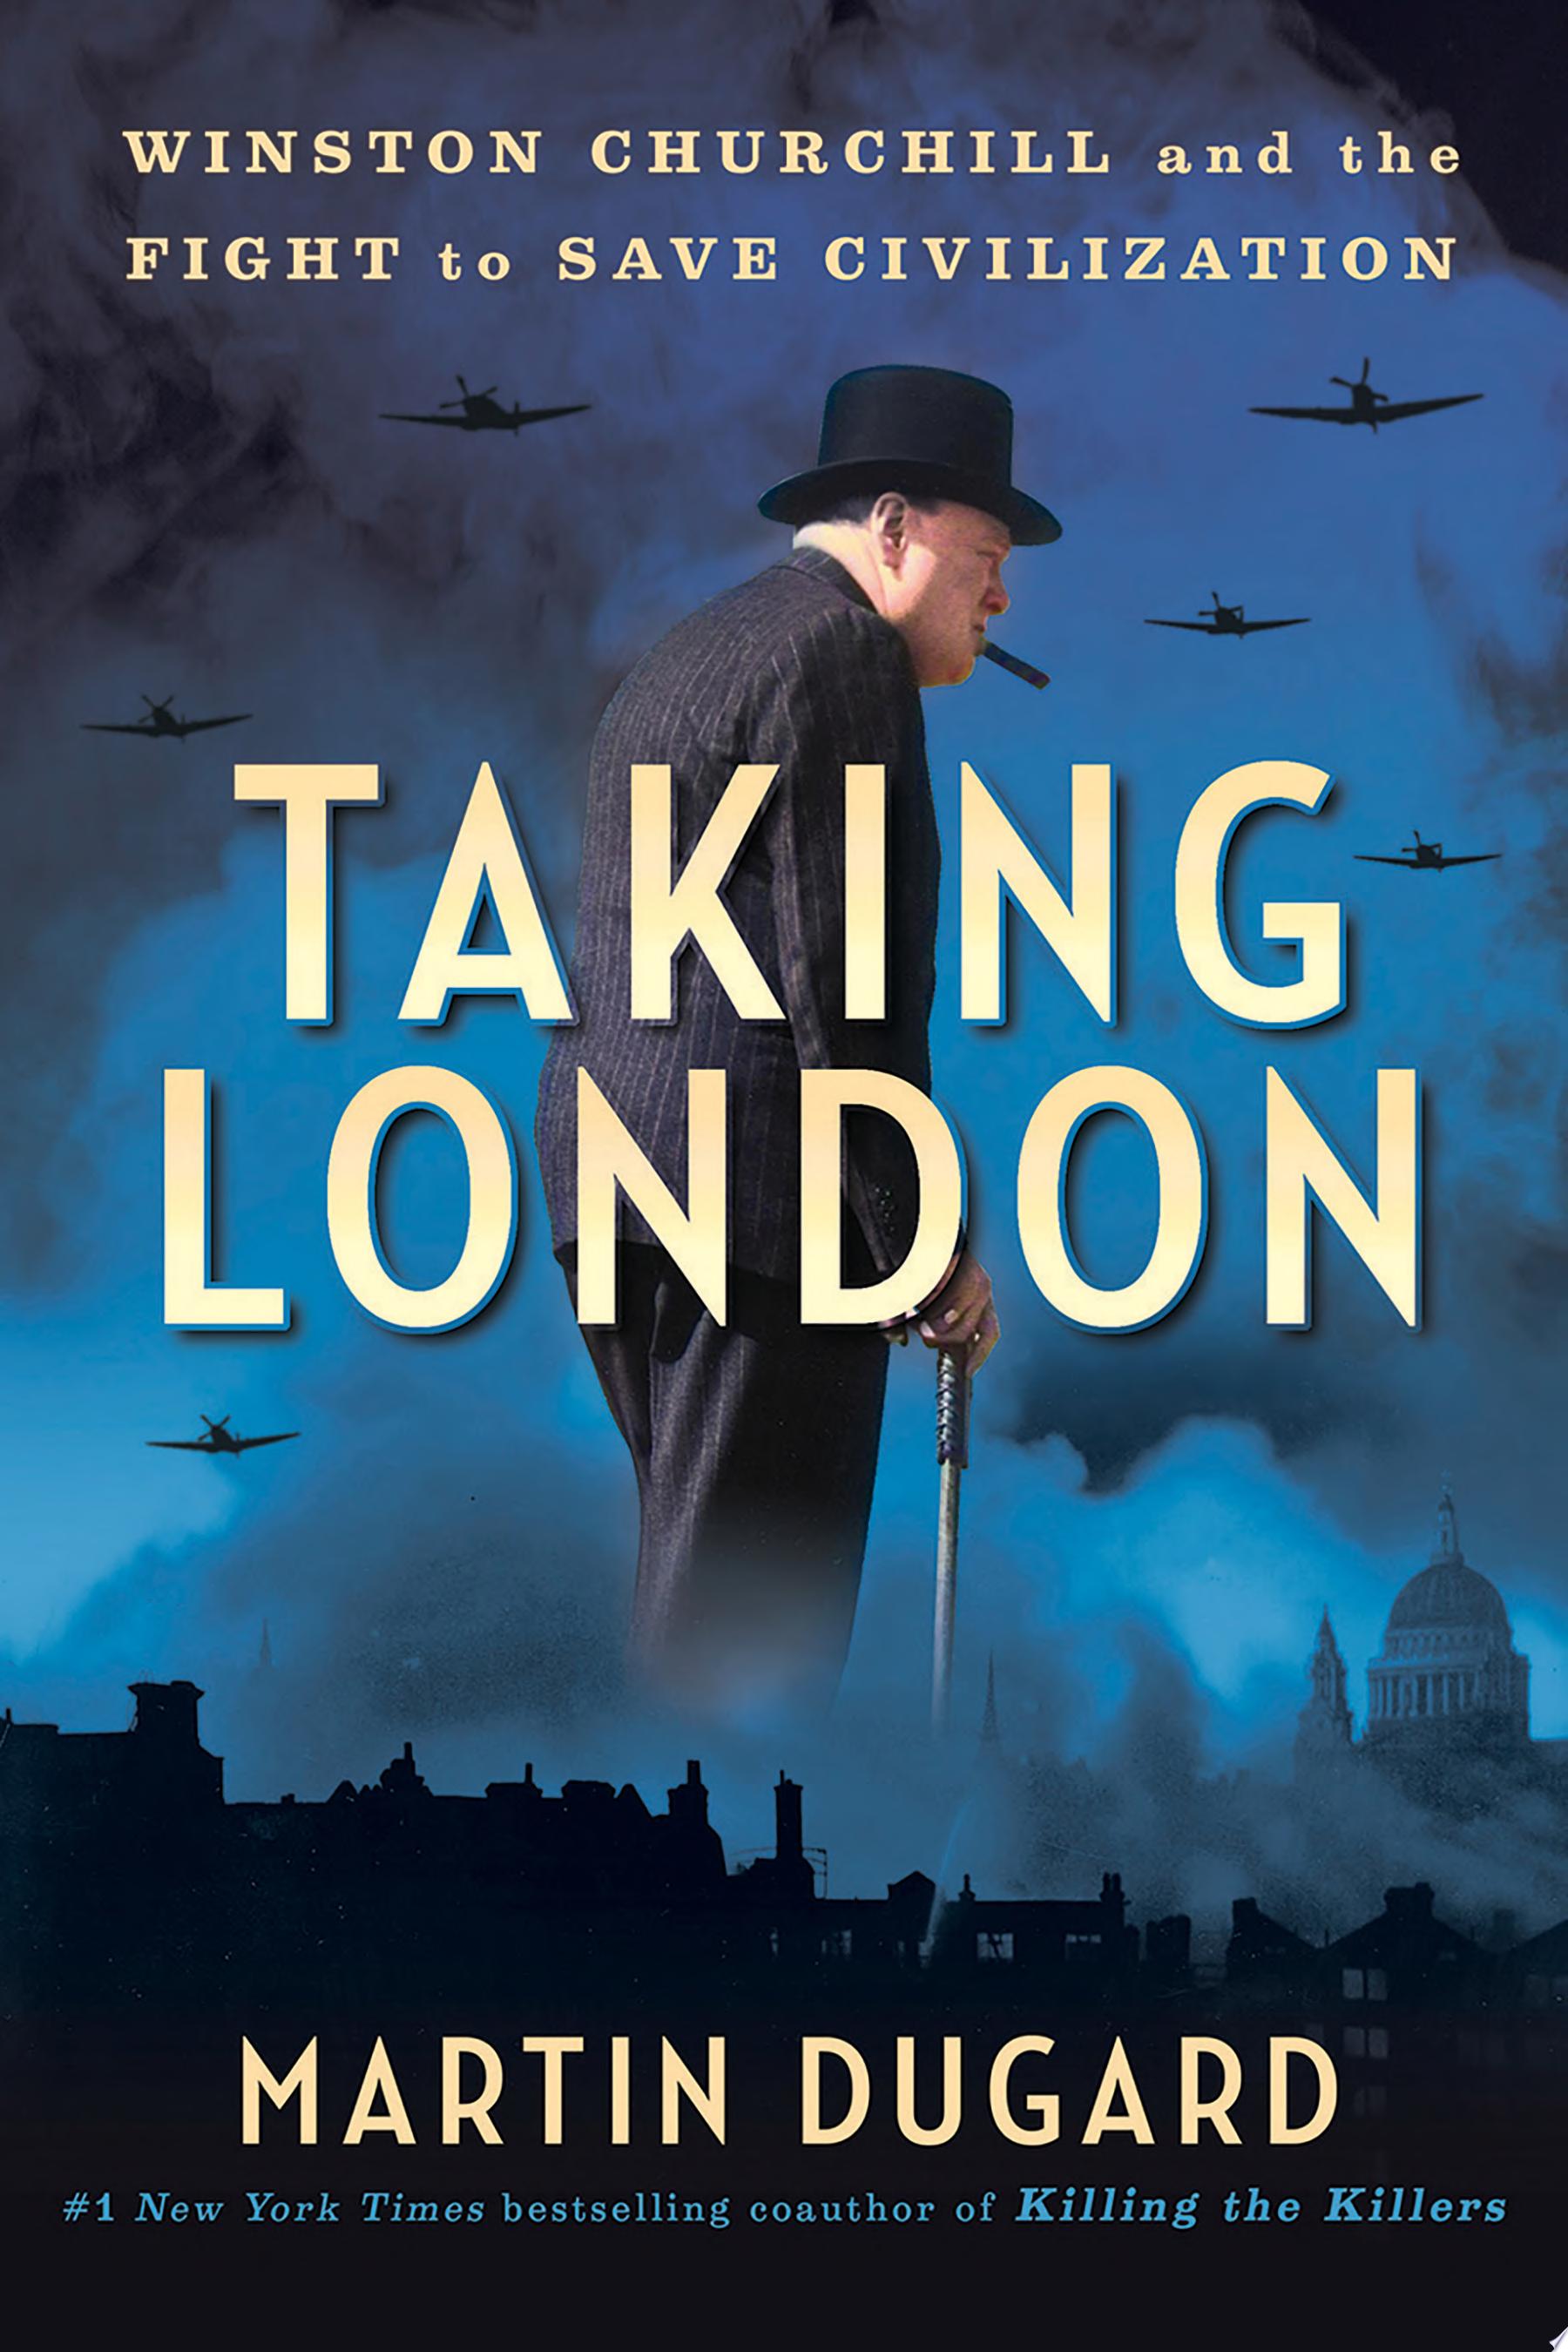 Image for "Taking London"